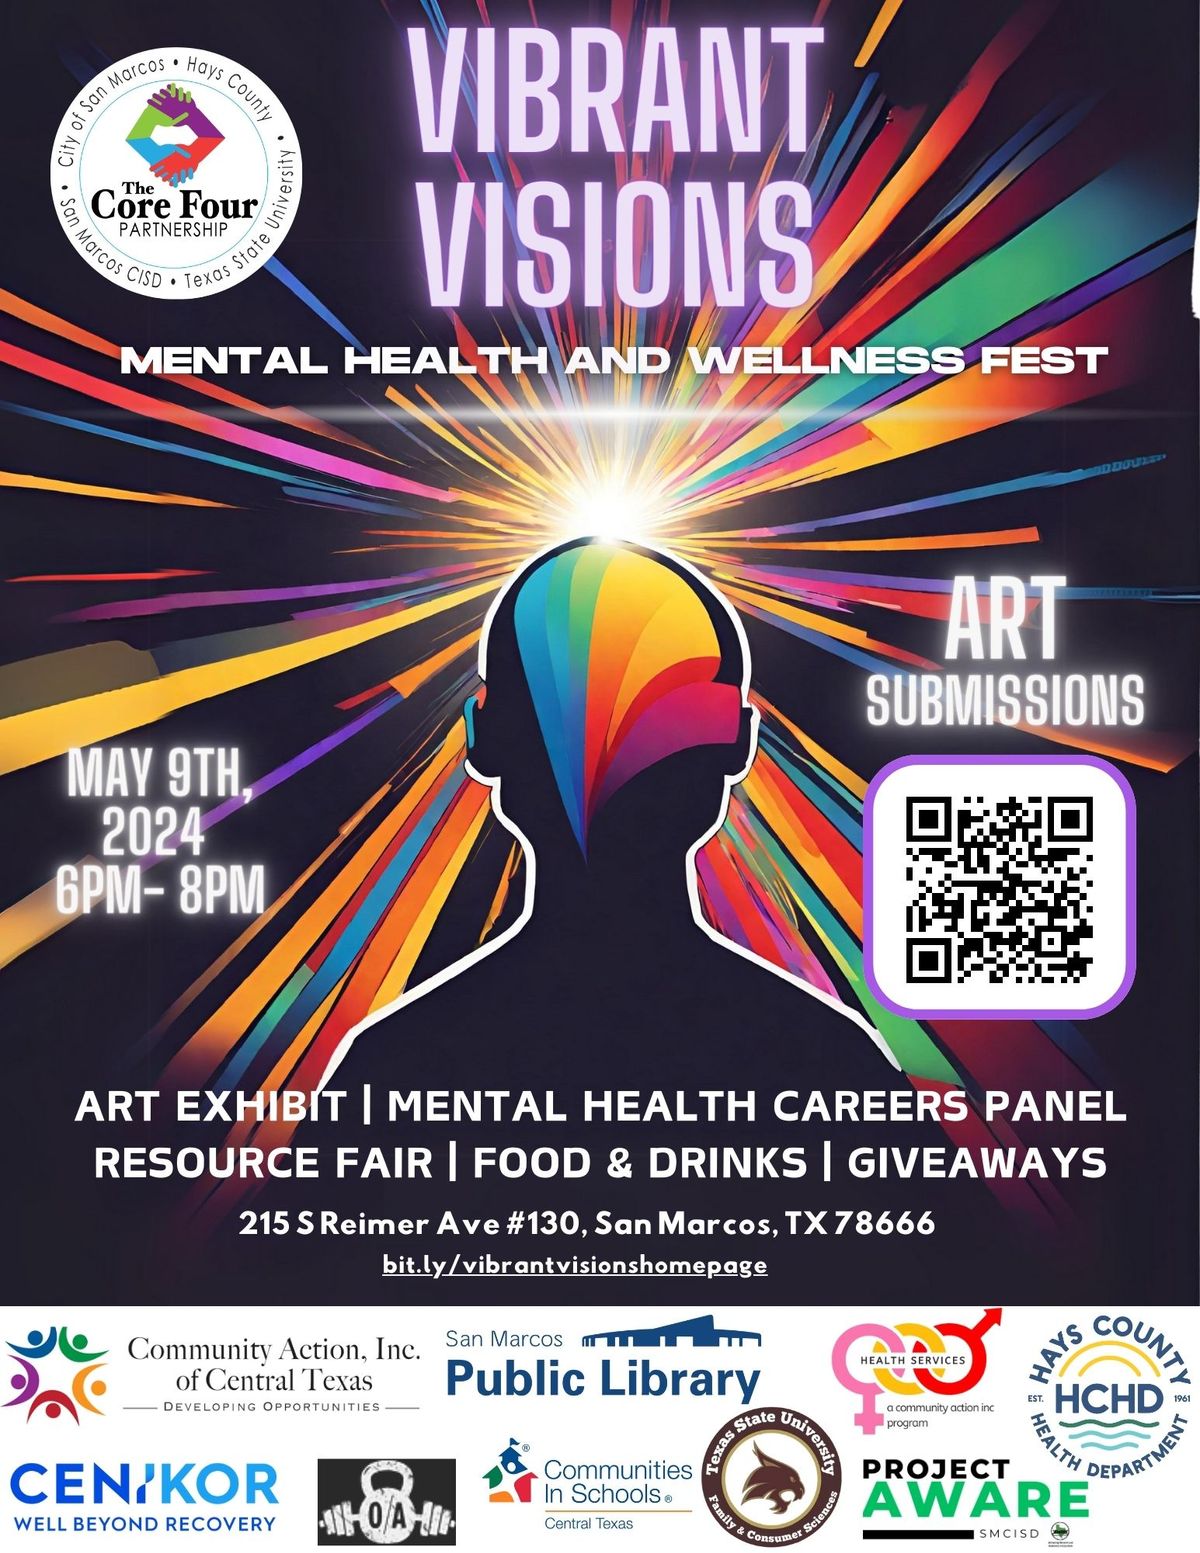 Vibrant Visions- Mental Health and Wellness Fest 2024